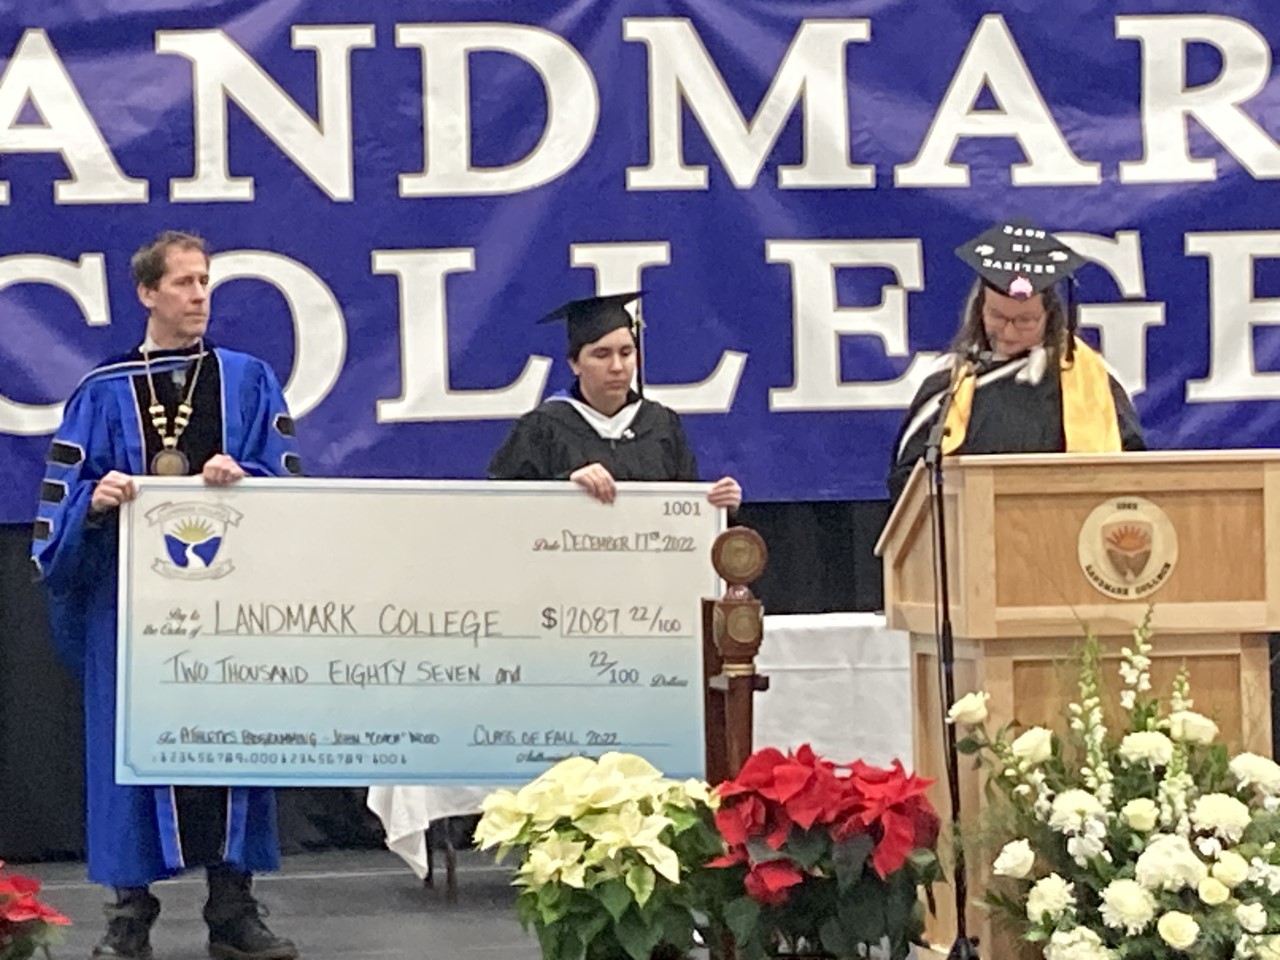 Image of President Eden and graduating student holding oversized check in the amount of $2,087.22, while another graduating student makes remarks at the podium.